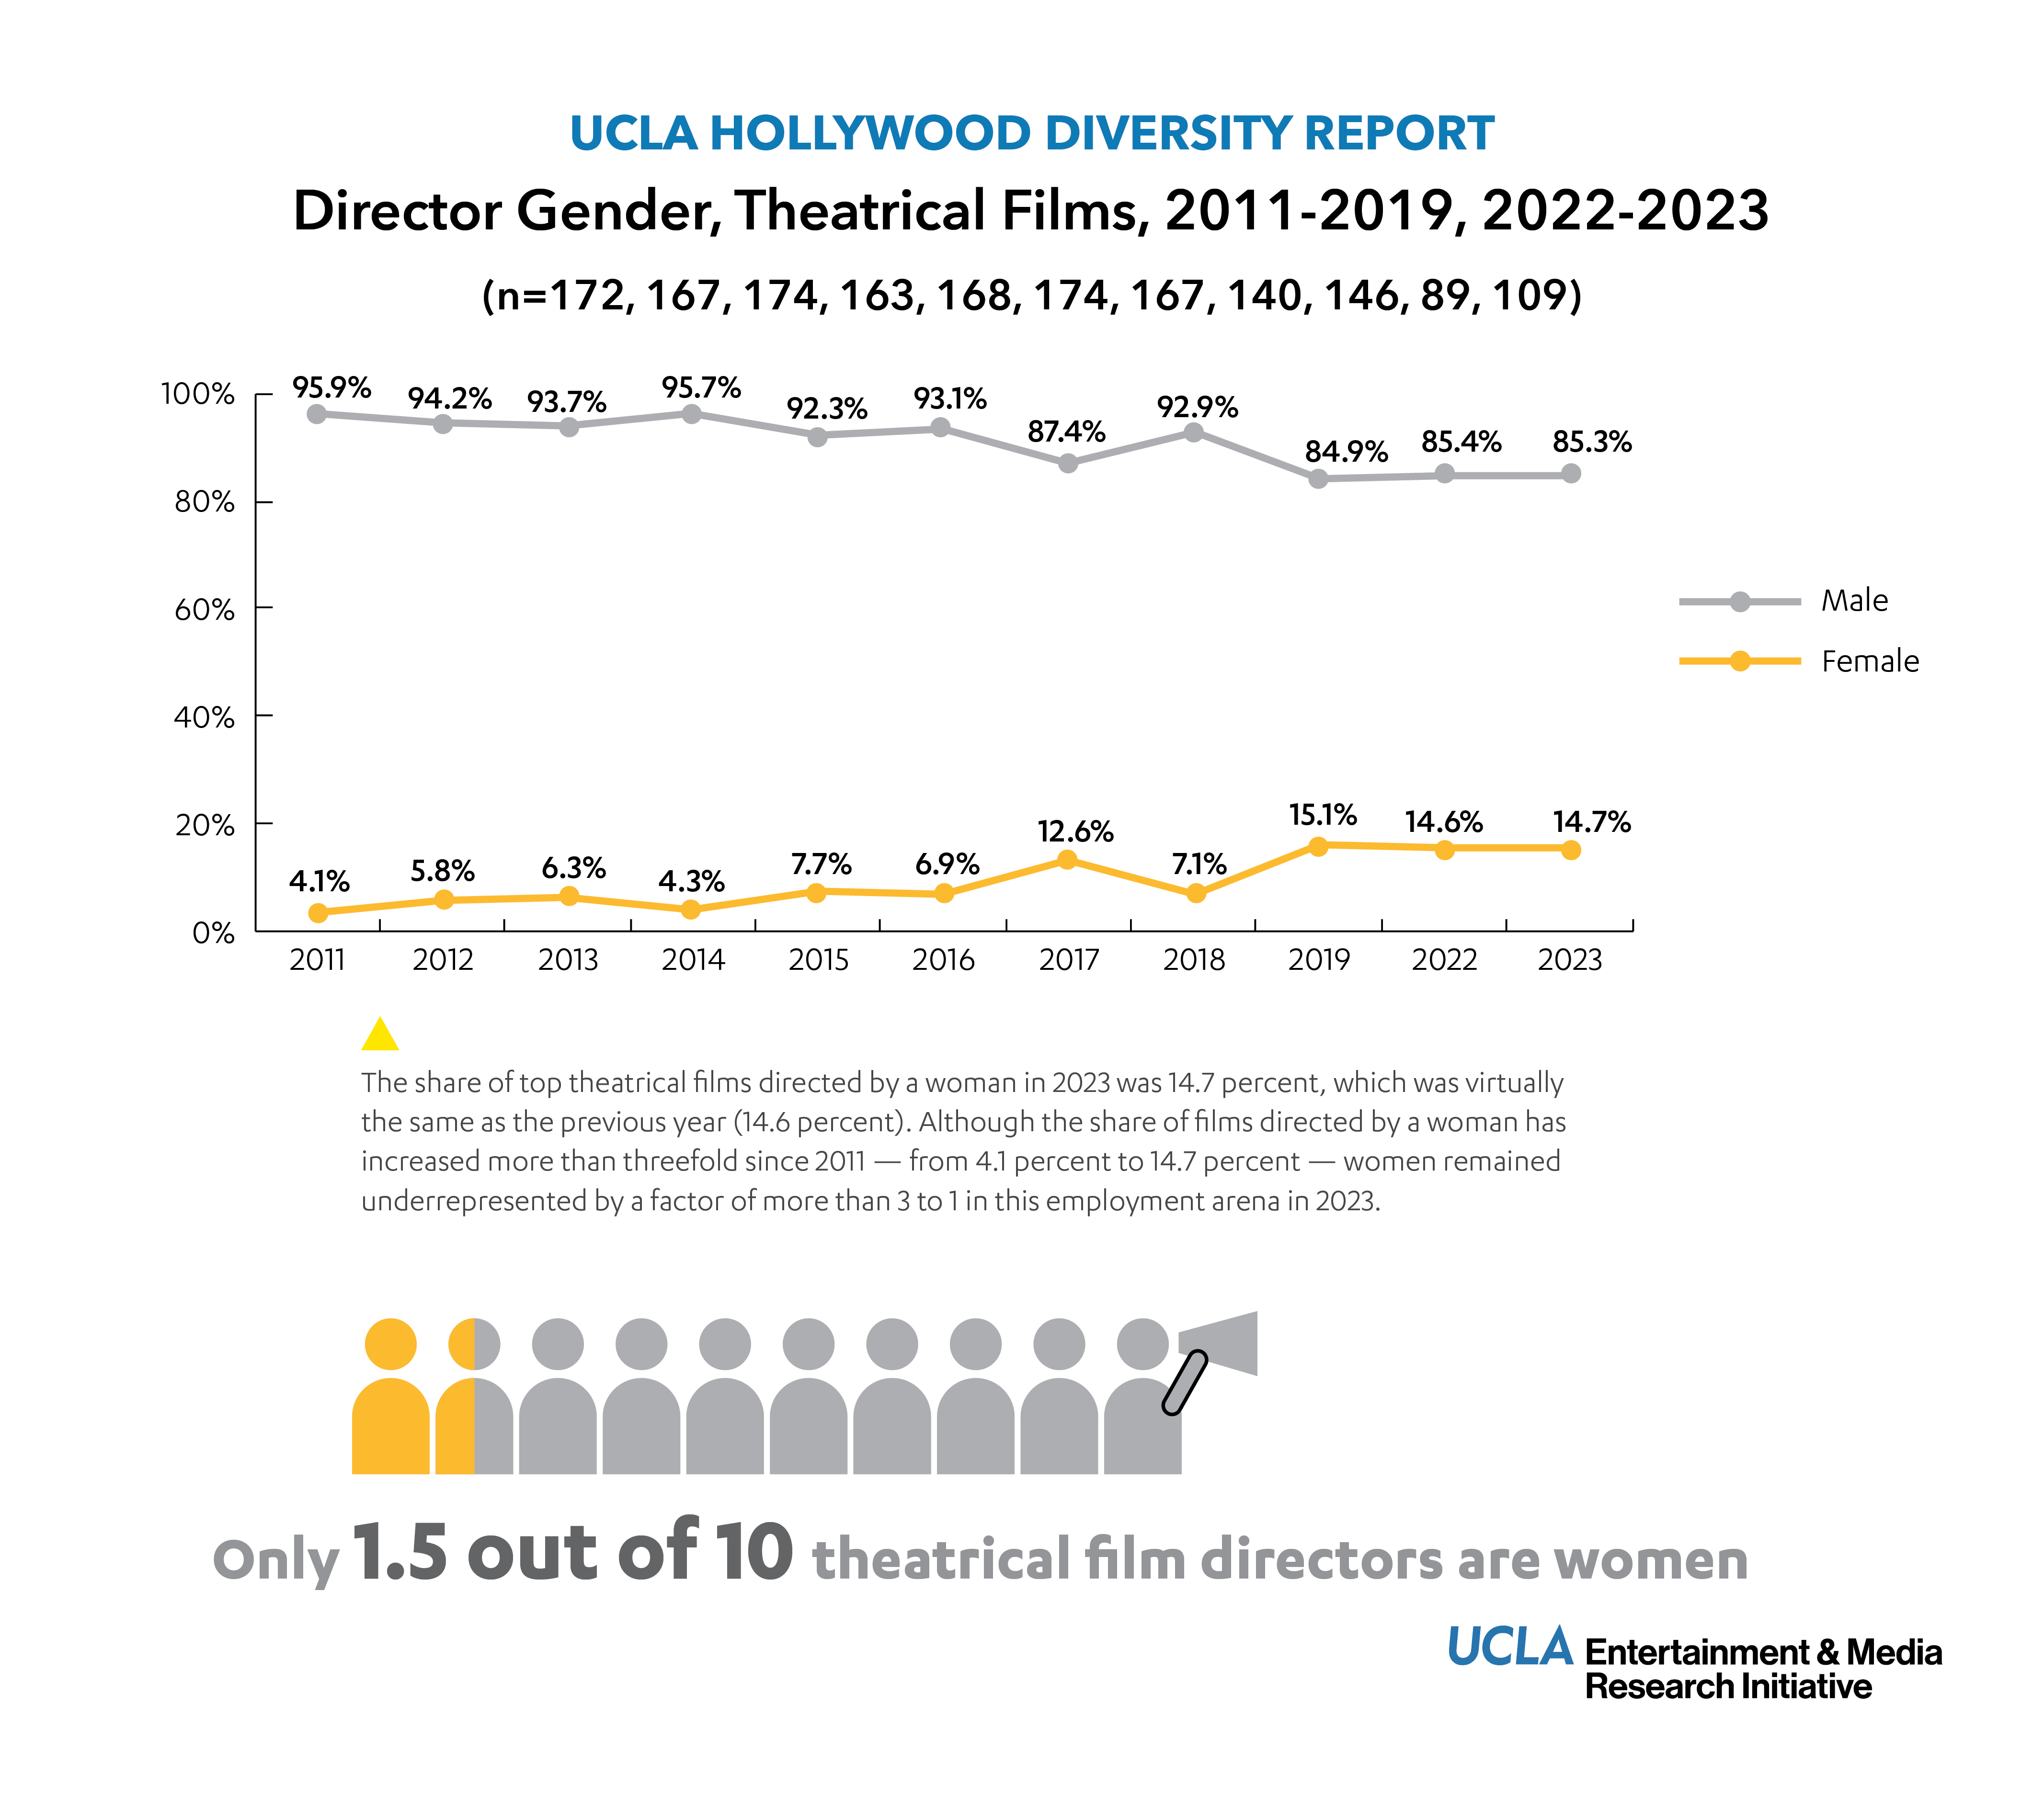 Chart showing gender diversity among directors in Hollywood from the UCLA Hollywood Diversity Report